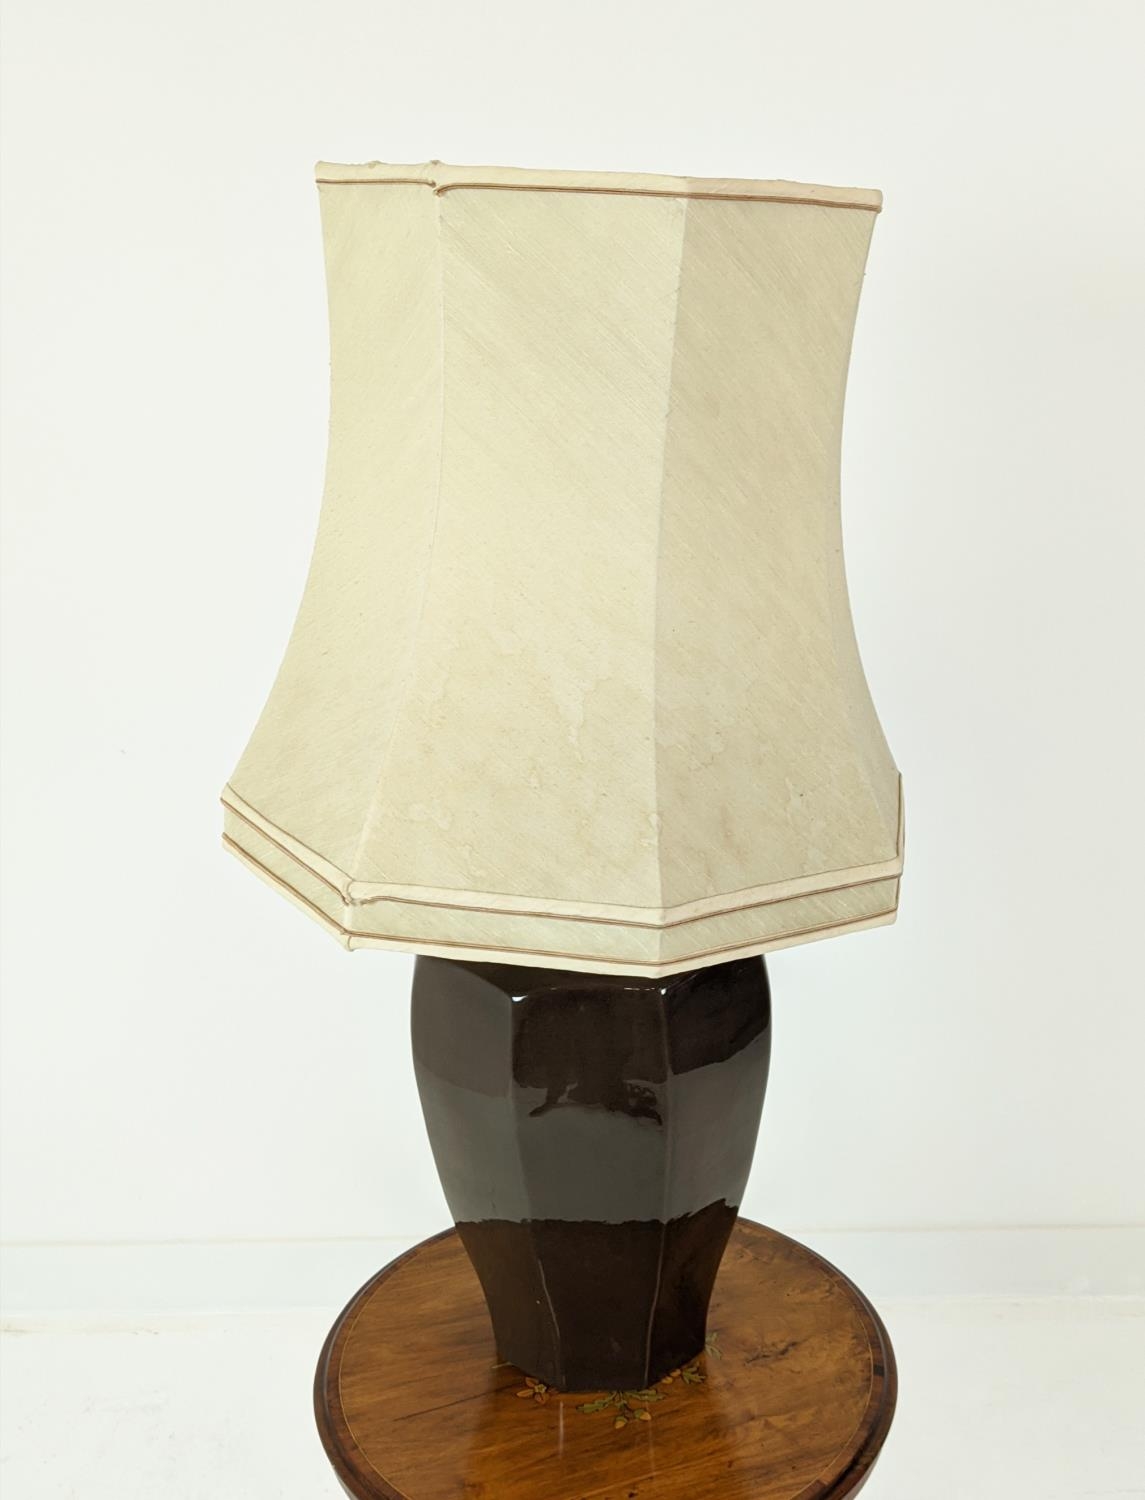 TABLE LAMP, glazed ceramic, with shade, 88cm H approx. - Image 2 of 6